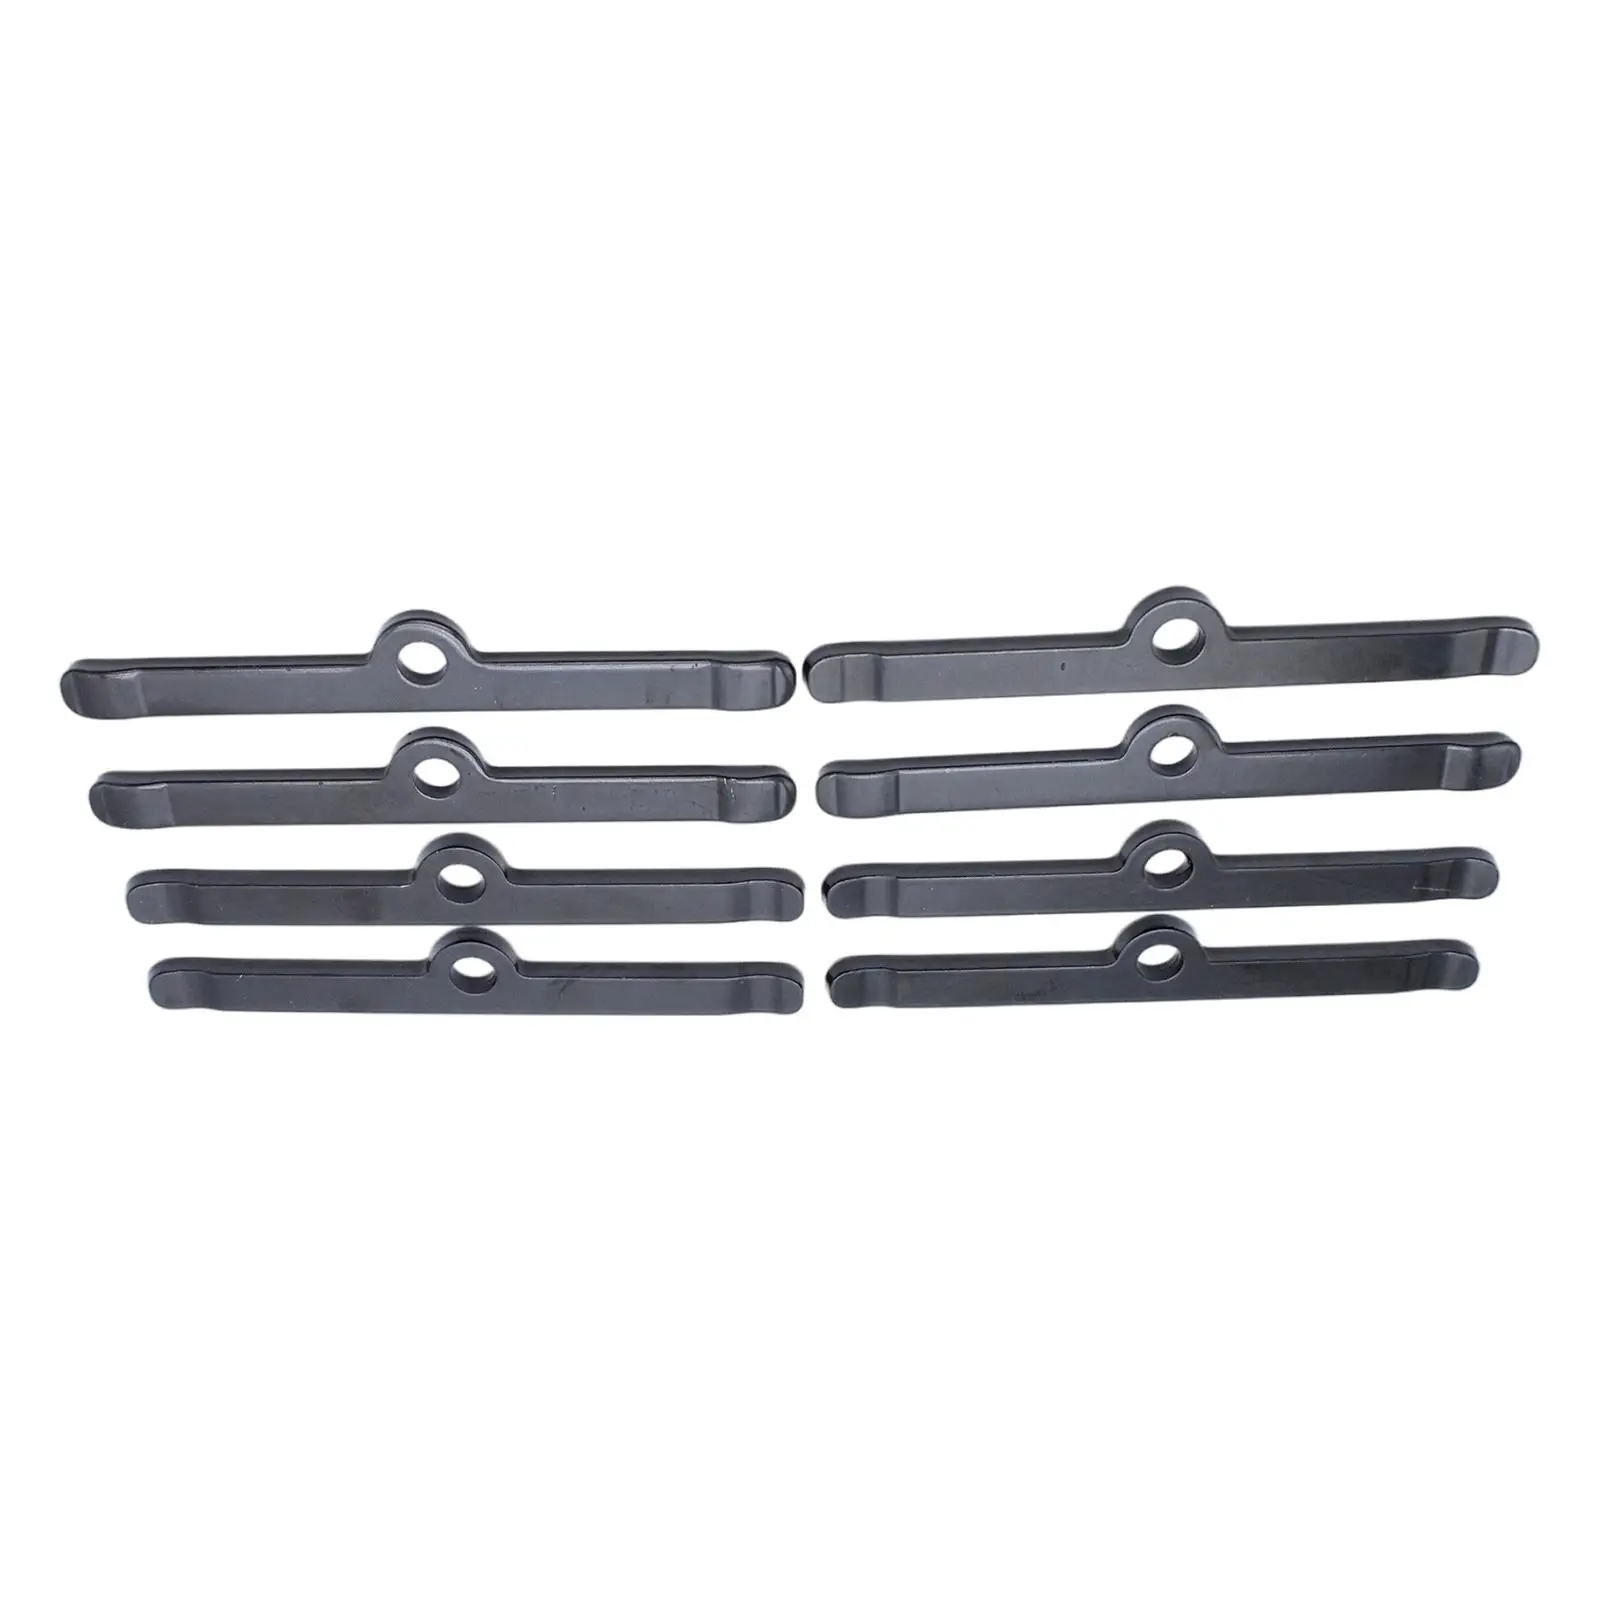 8x Spreader Bars Direct Replaces Spare Parts for 283 305